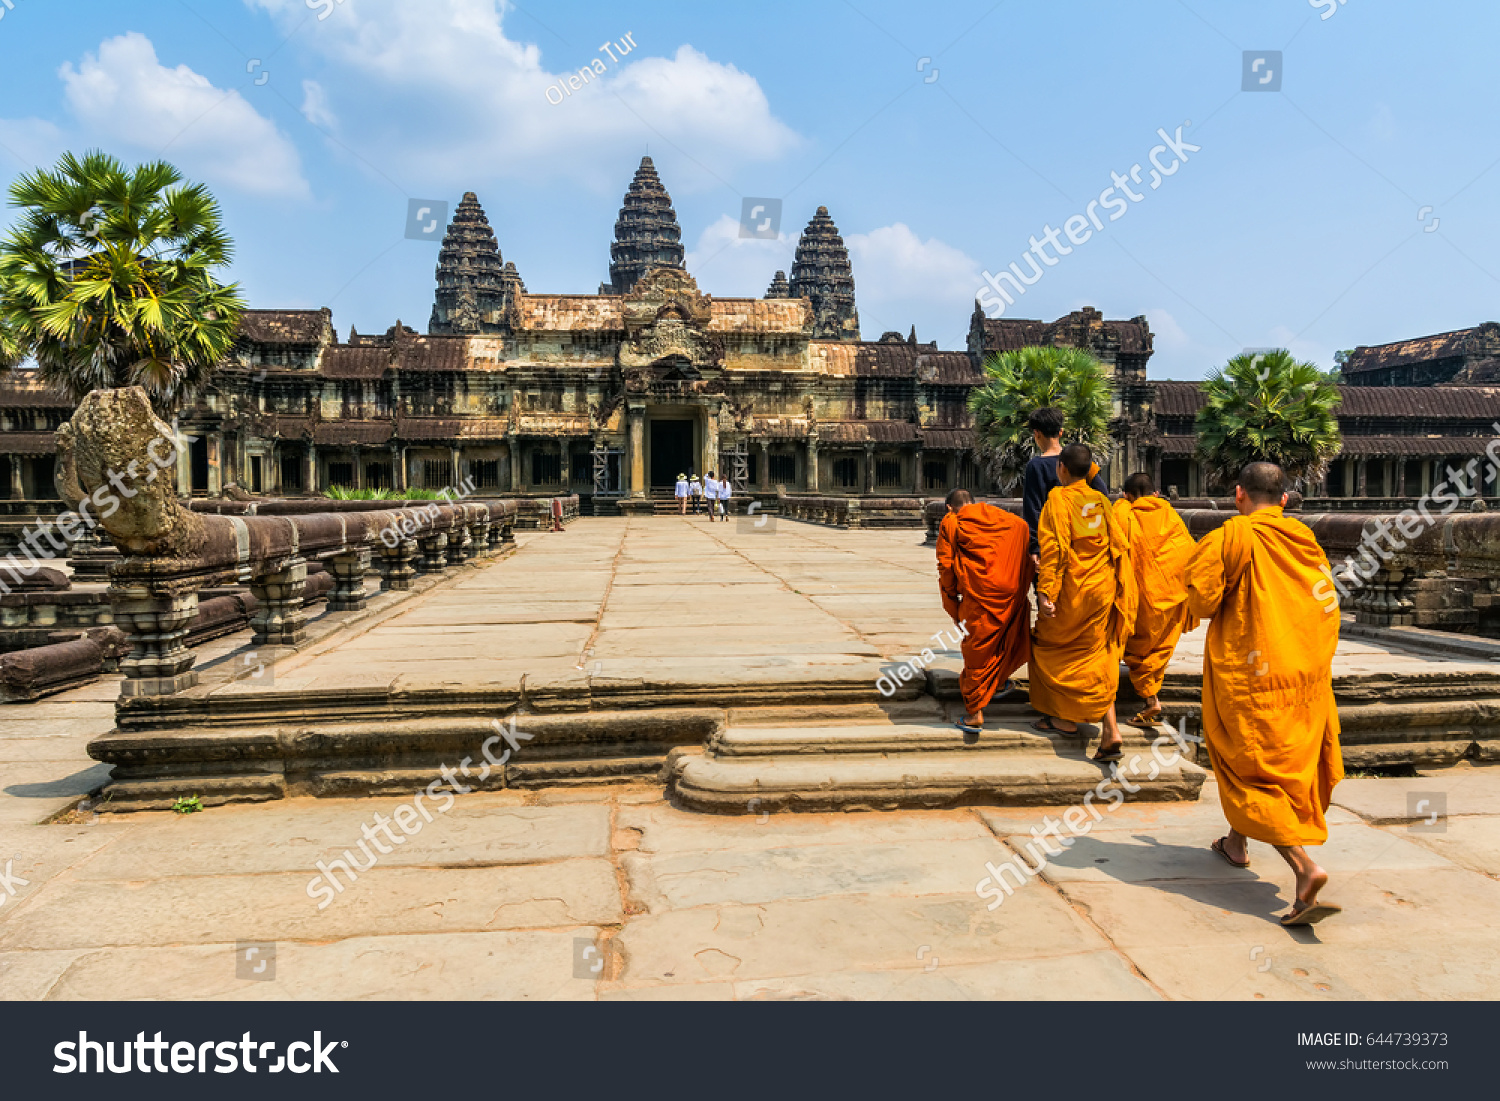 Amazing view of Angkor Wat is a temple complex in Cambodia and the largest religious monument in the world. Location: Siem Reap, Cambodia. Artistic picture. Beauty world #644739373